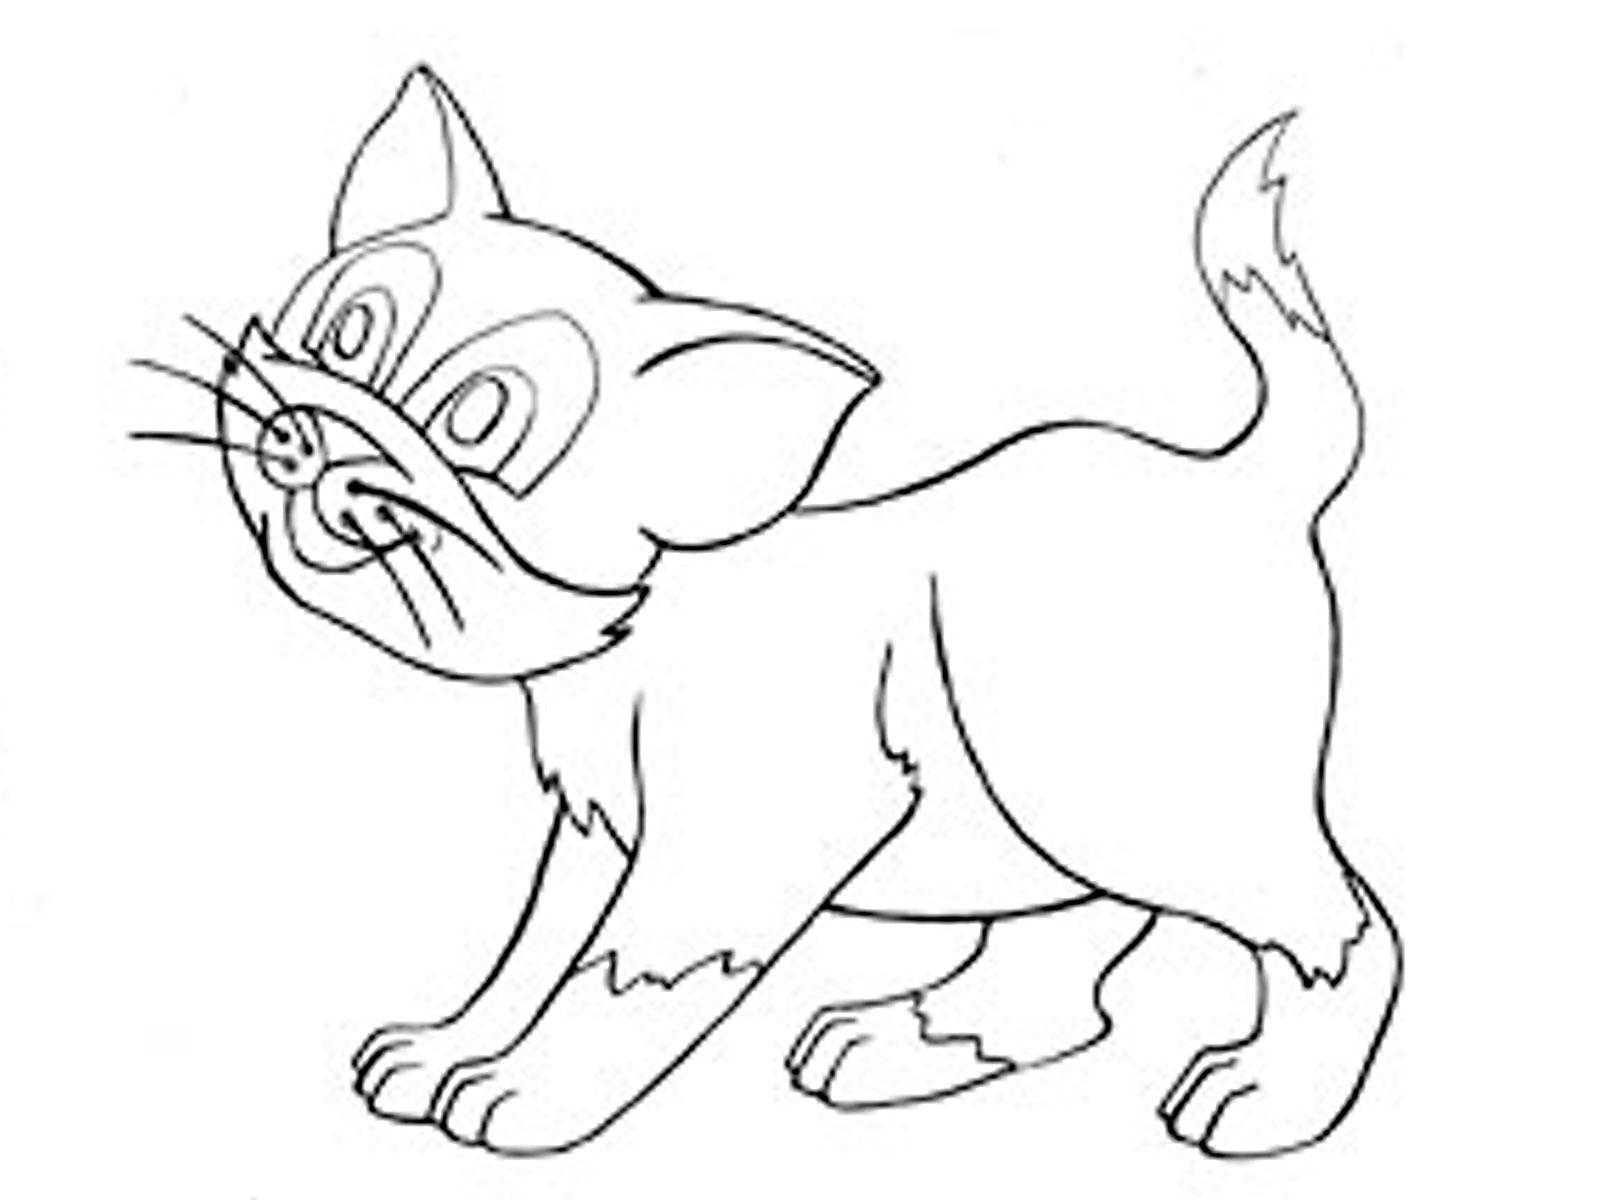 Coloring Kitty. Category Pets allowed. Tags:  cat, kitten.